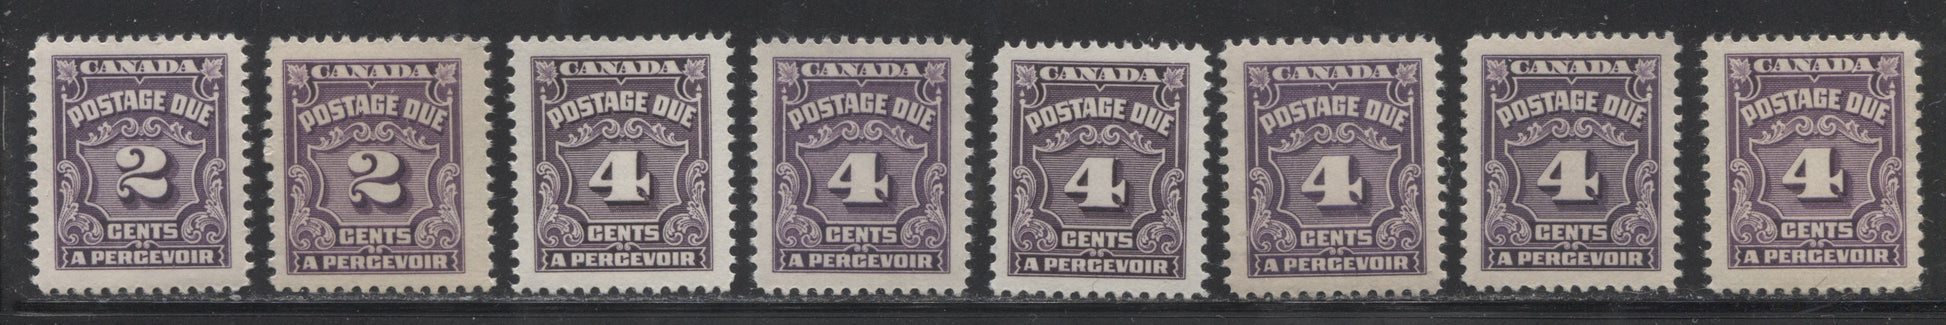 Canada #J15-J20 1935-1965 Fourth Postage Due Issue - Specialized Lot of 24 Mostly VF NH Stamps Brixton Chrome 